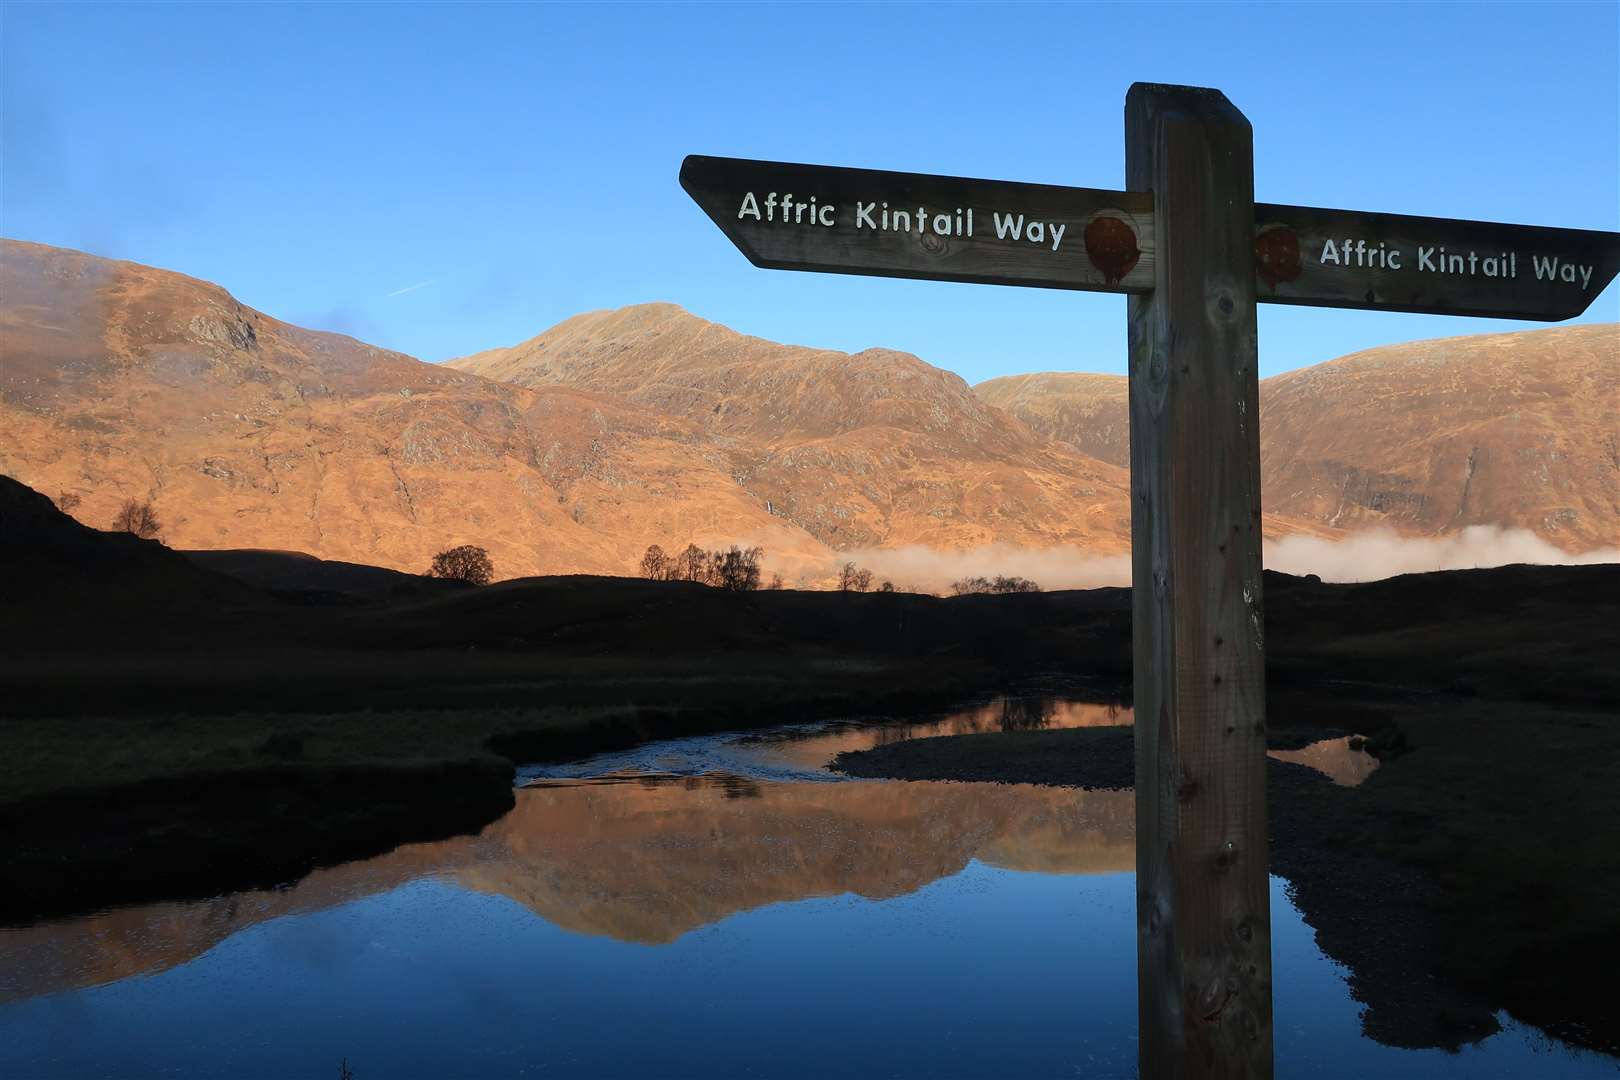 The Affric Kintail Way.